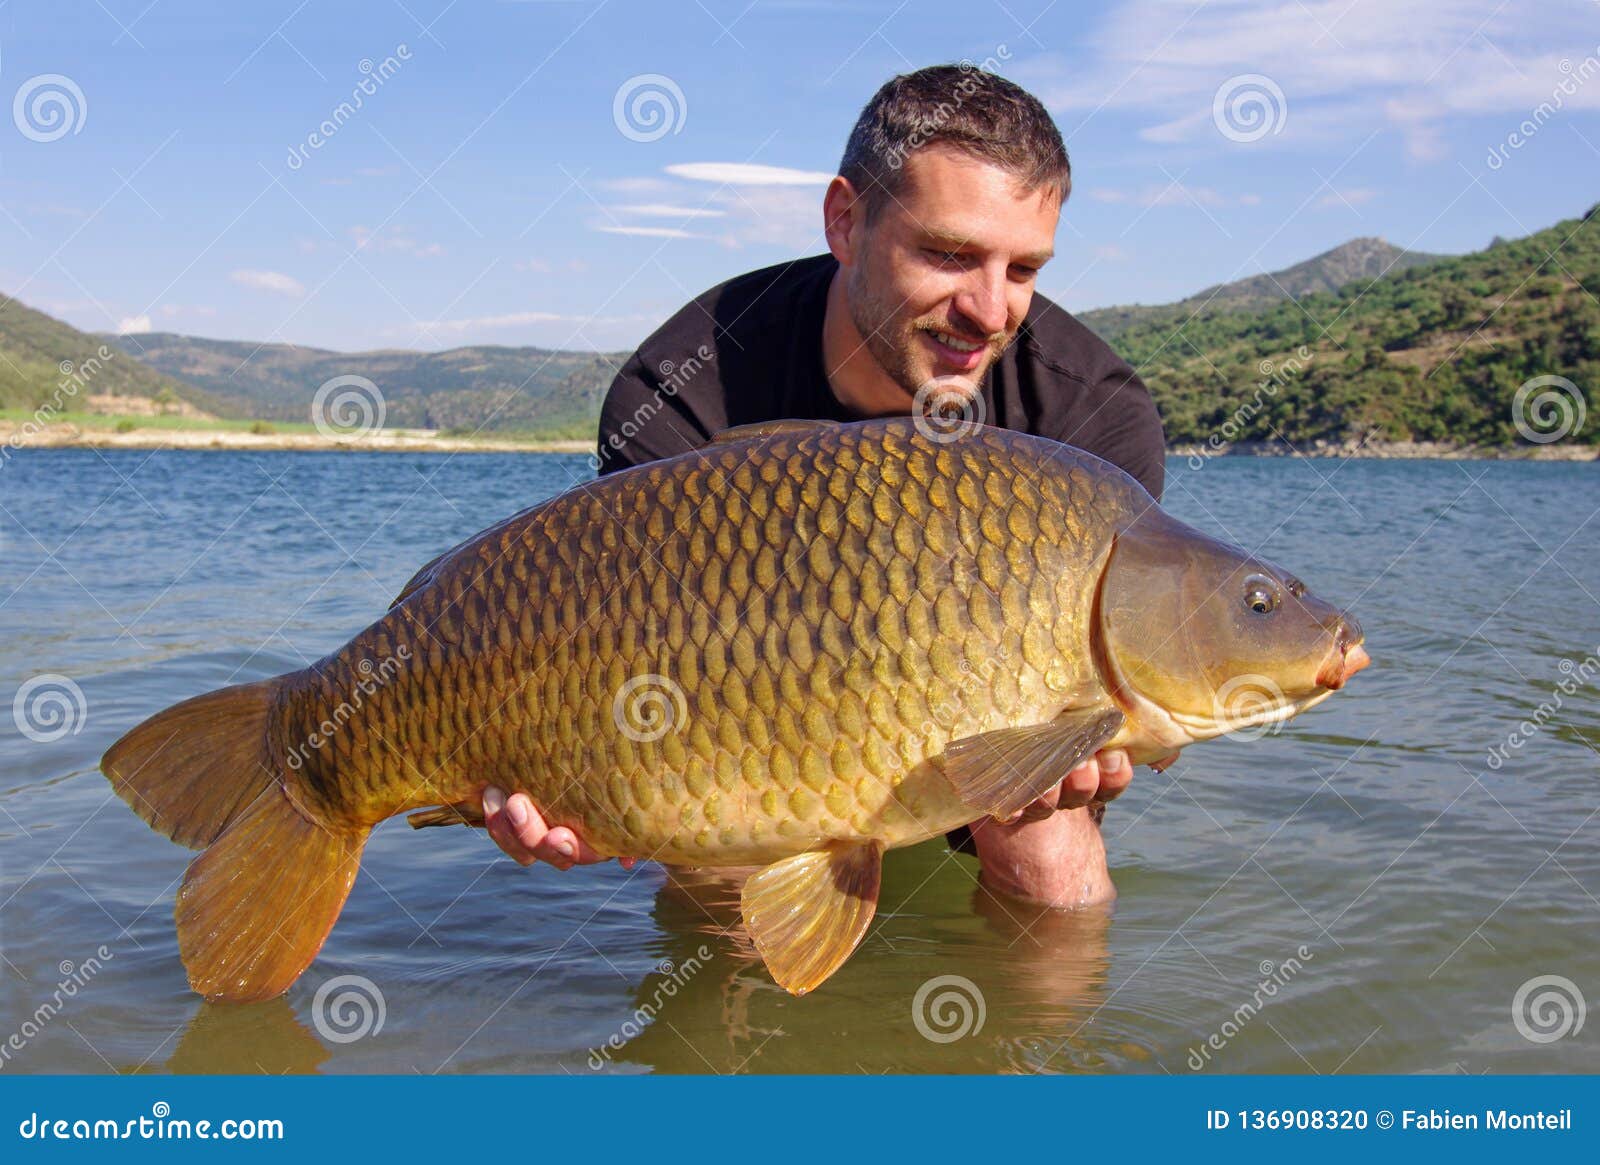 carp fishing. catch and release